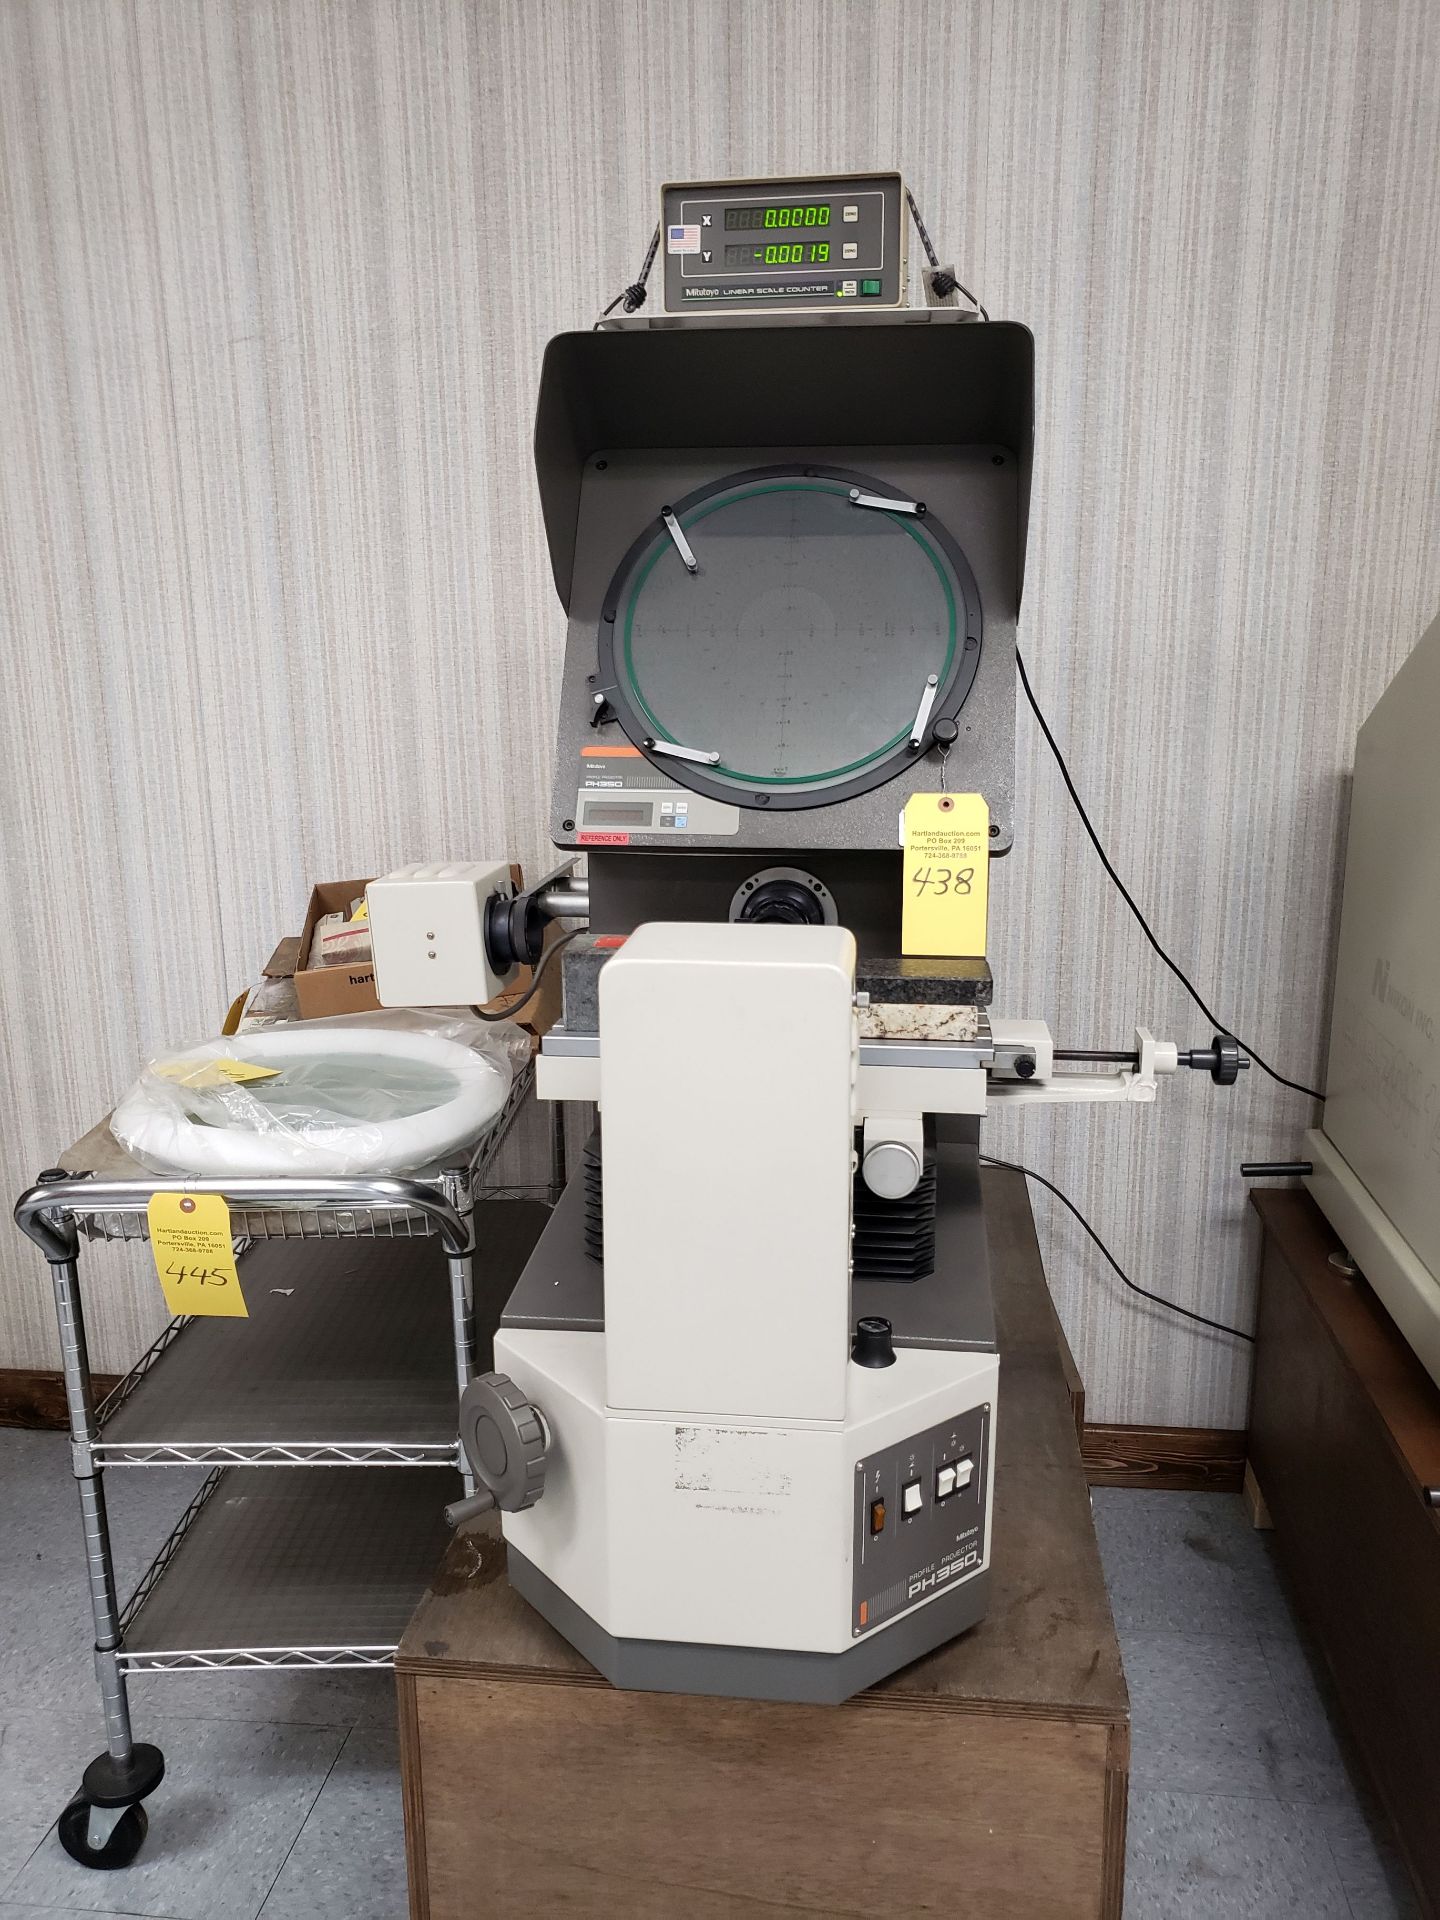 MITUTOYO PH350 COMPARATOR W MITUTOYO 2 AXIS DRO, SN 350167, CODE NO 172-952A